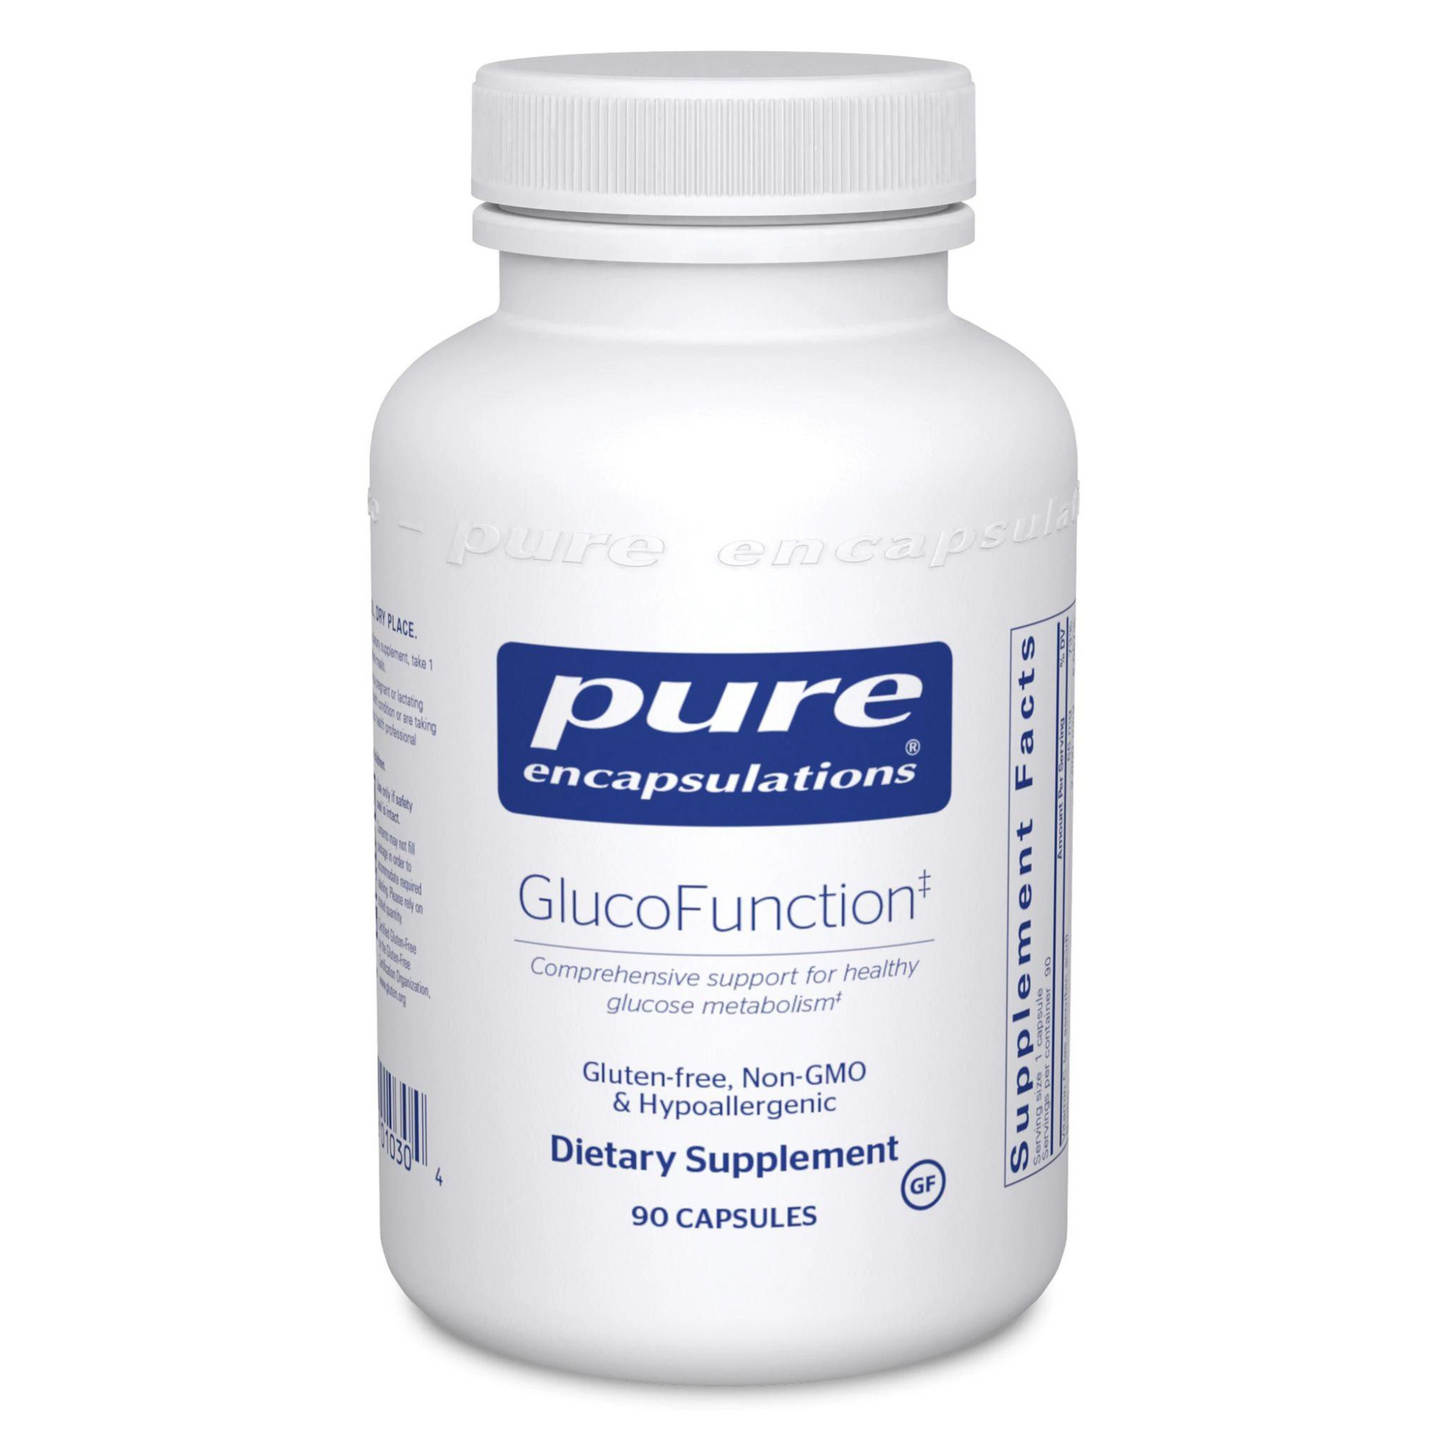 Primary Image of GlucoFunction Capsules (90 count)